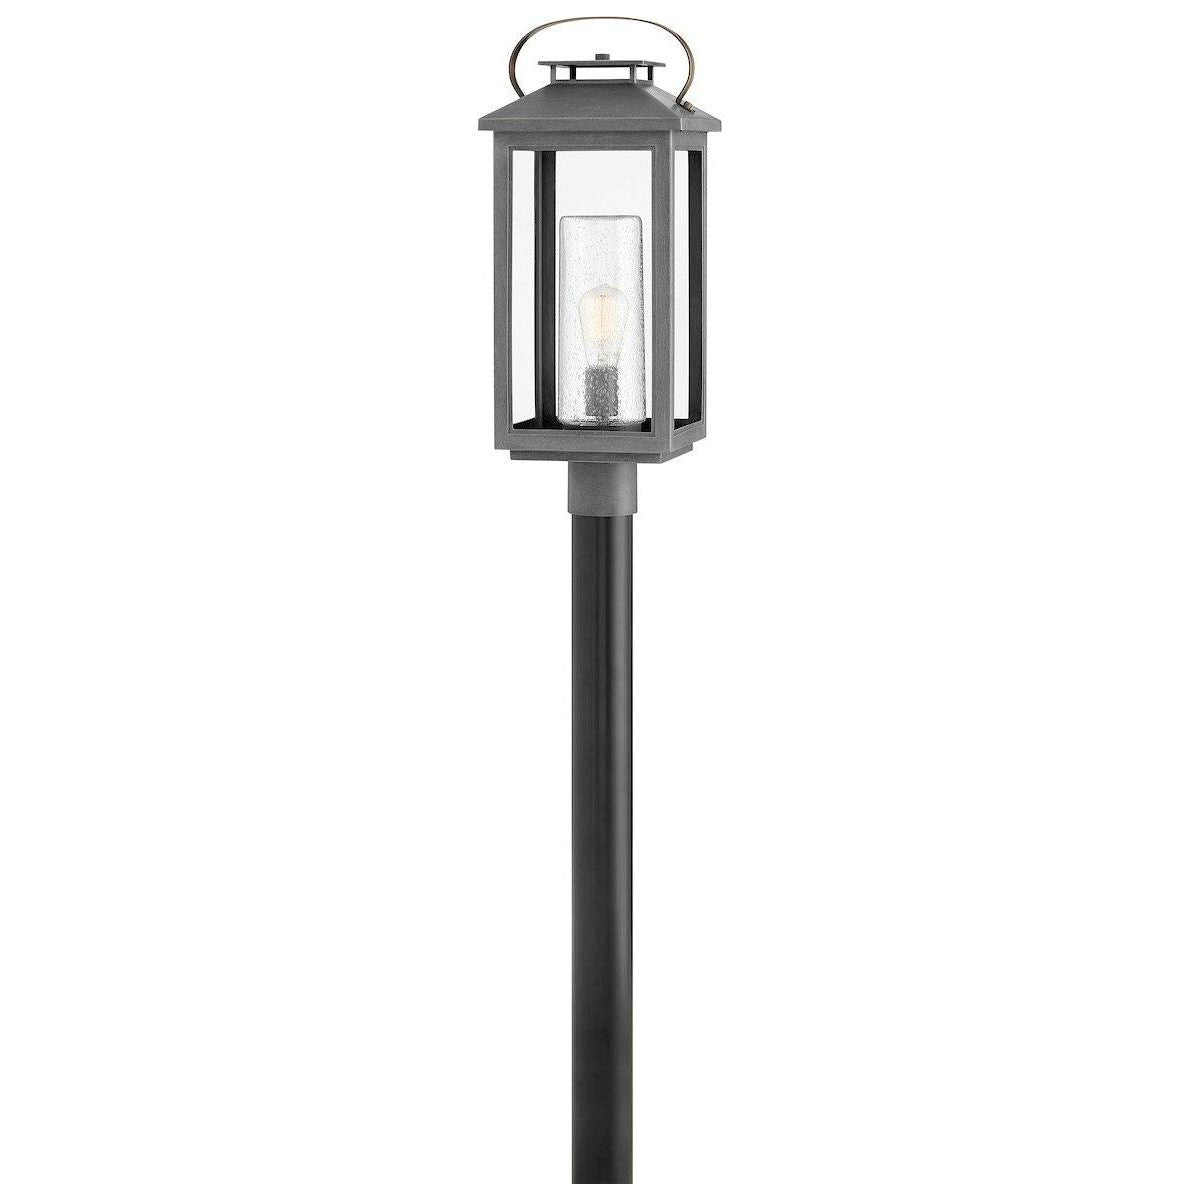 Hinkley - Atwater Outdoor Post Light - Lights Canada